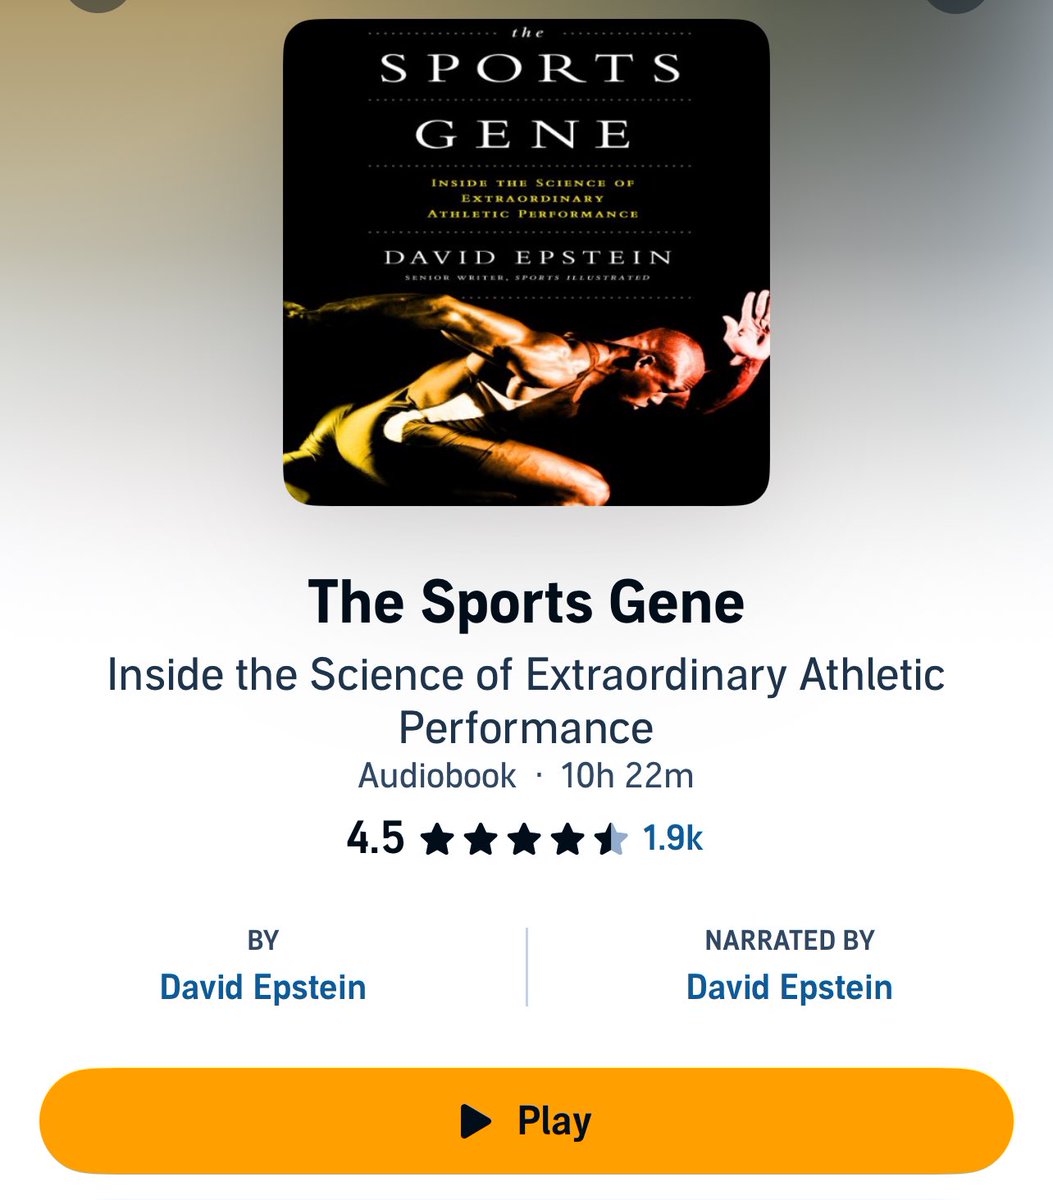 For anyone who wants to better understand genetics and performance, start here 🧬

Fun read and illuminating